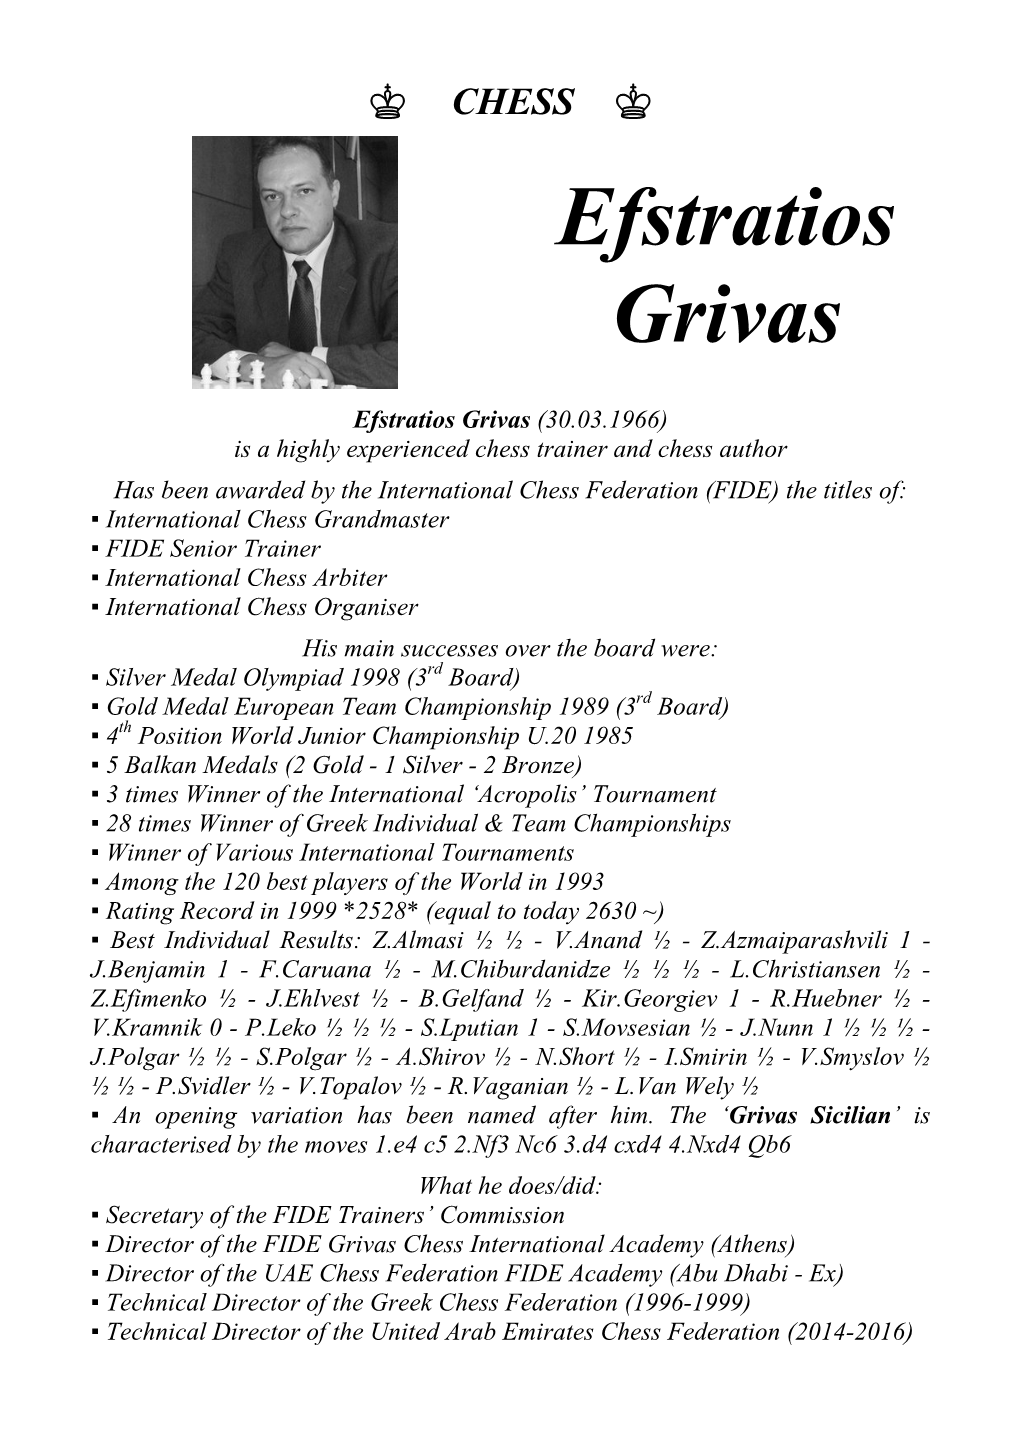 Efstratios Grivas (30.03.1966) Is a Highly Experienced Chess Trainer and Chess Author